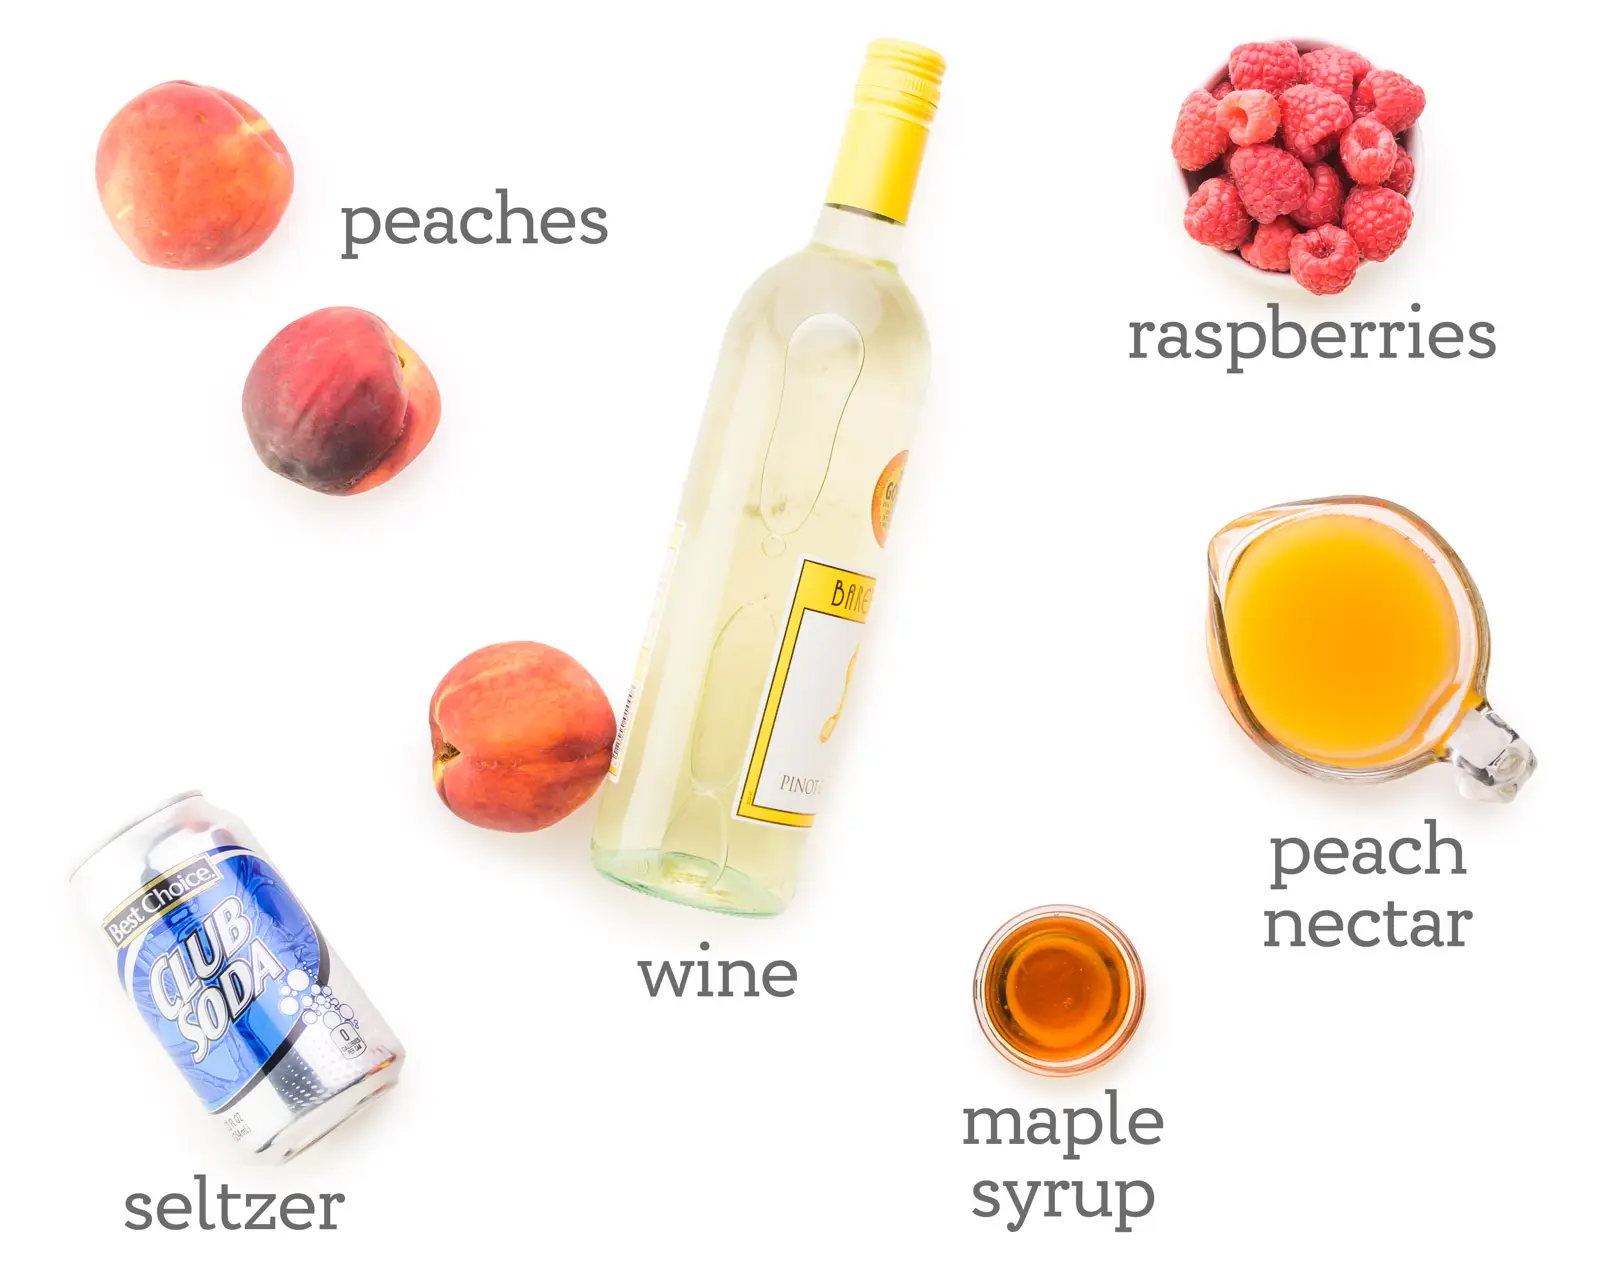 Looking down on a white table with ingredients. The labels next to them read, raspberries, peach nectar, maple syrup, wine, seltzer, and peaches.